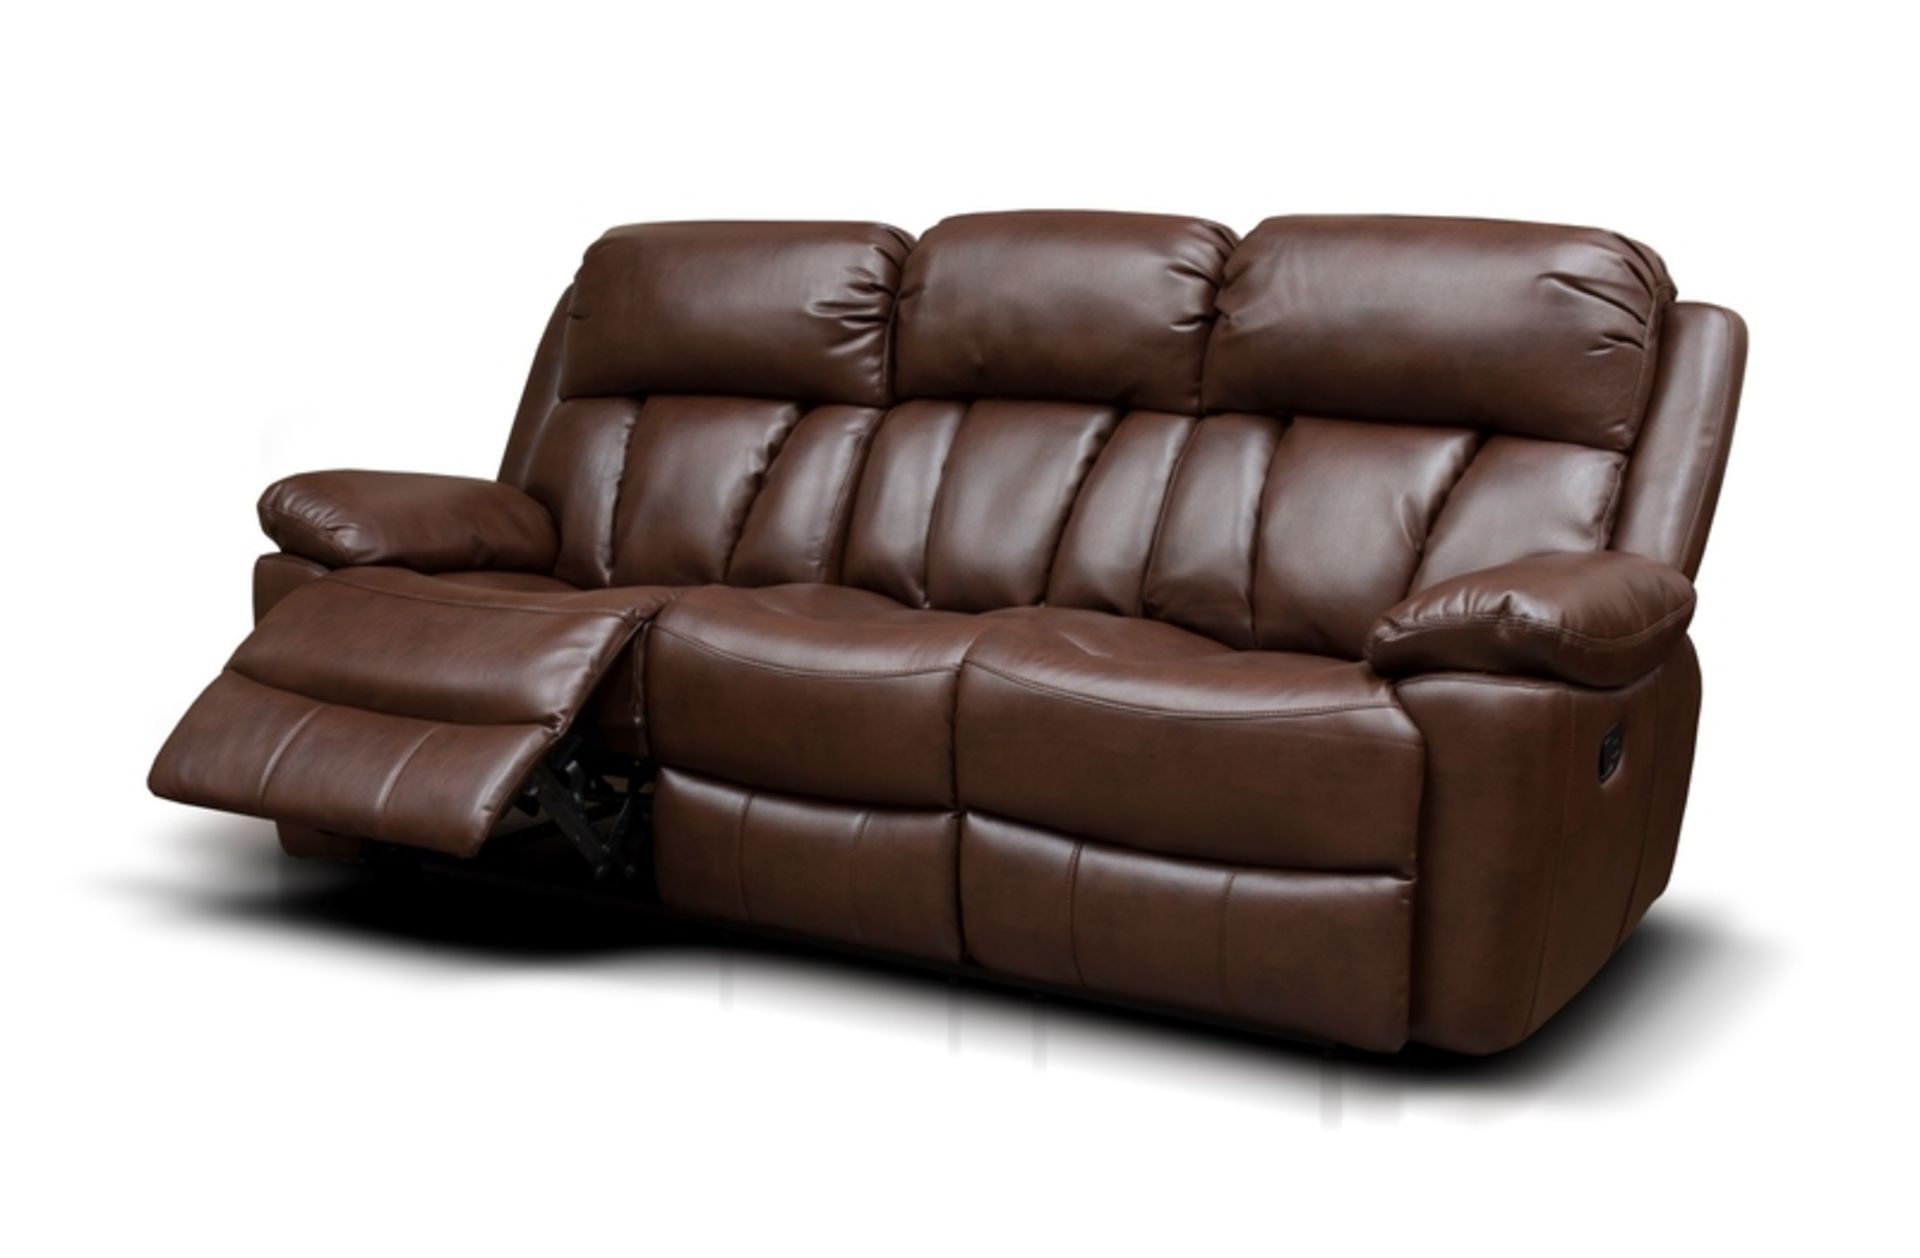 Brand New Boxed Benson 3 Seater Chestnut Leatheraire Reclining Sofa Plus 2 Matching Arm Chairs - Image 2 of 3